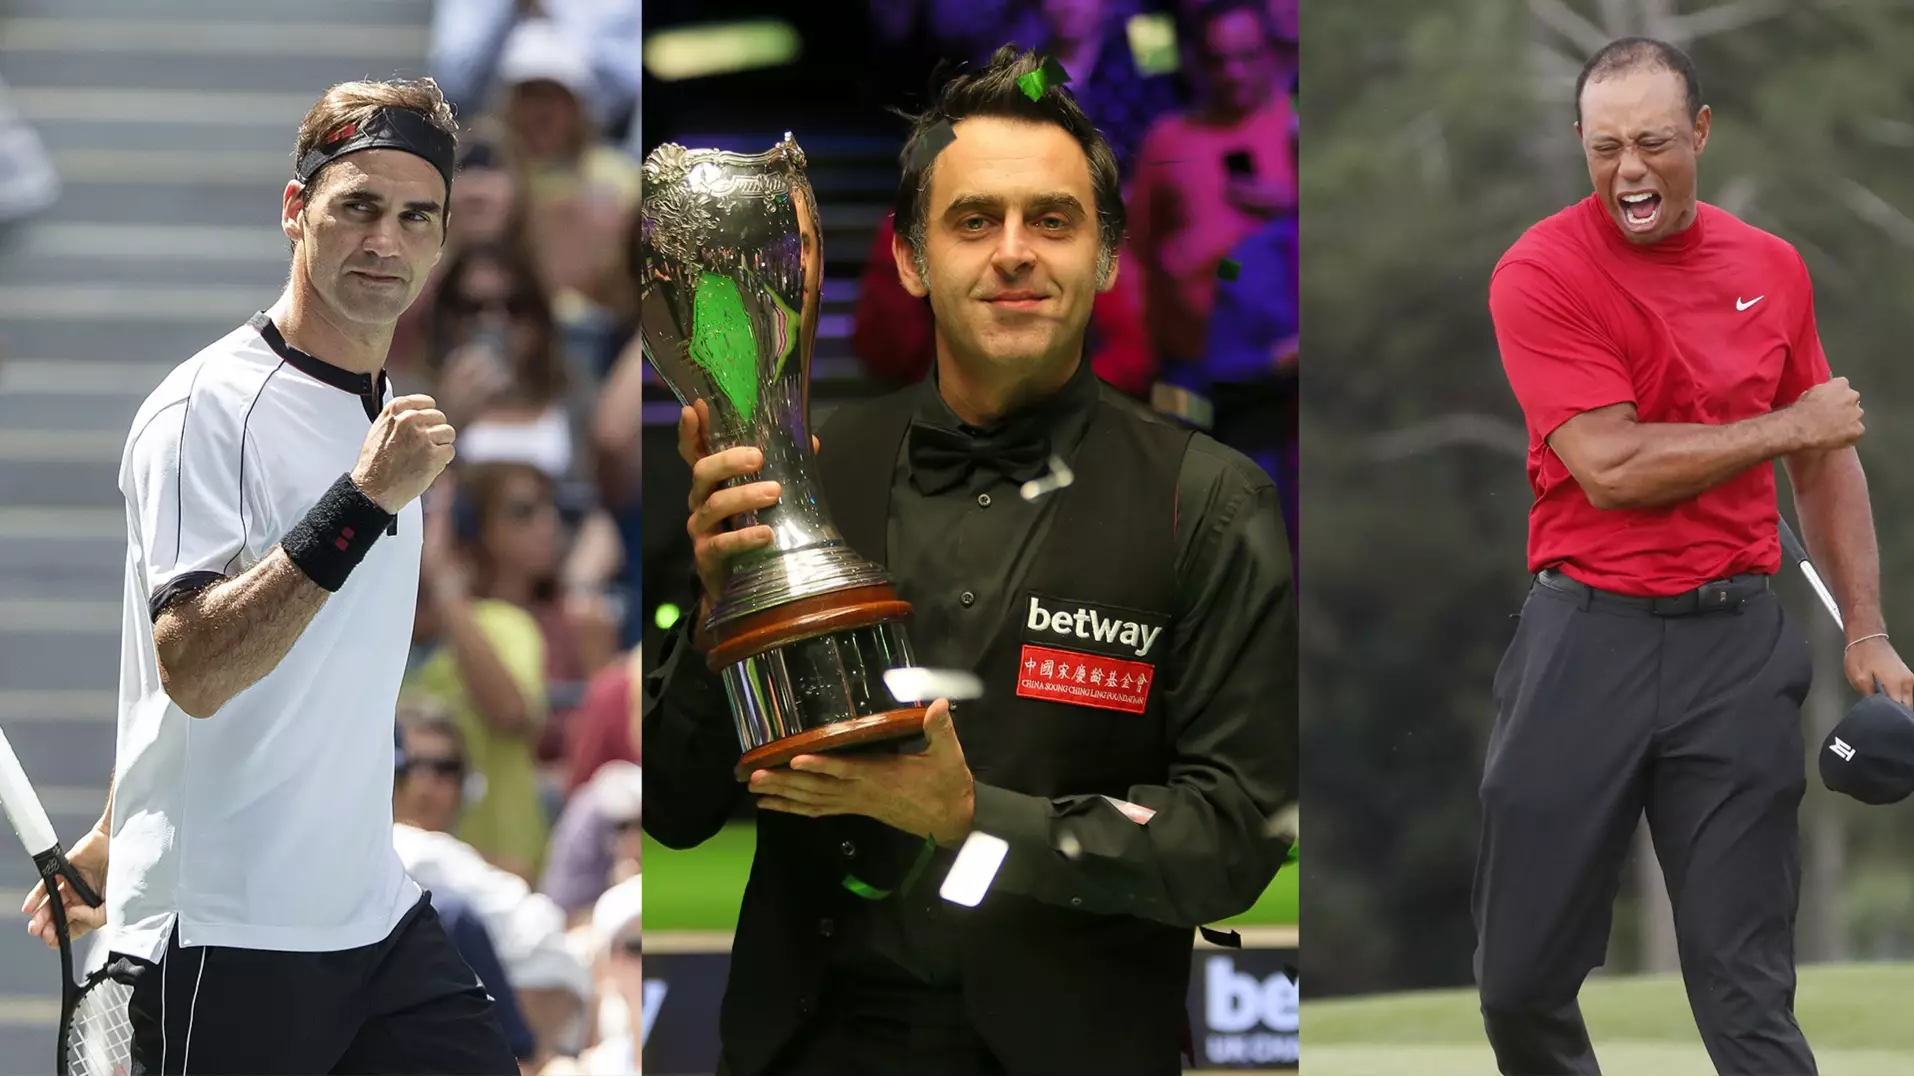 How Do Ronnie O’Sullivan, Tiger Woods and Roger Federer Match Up?